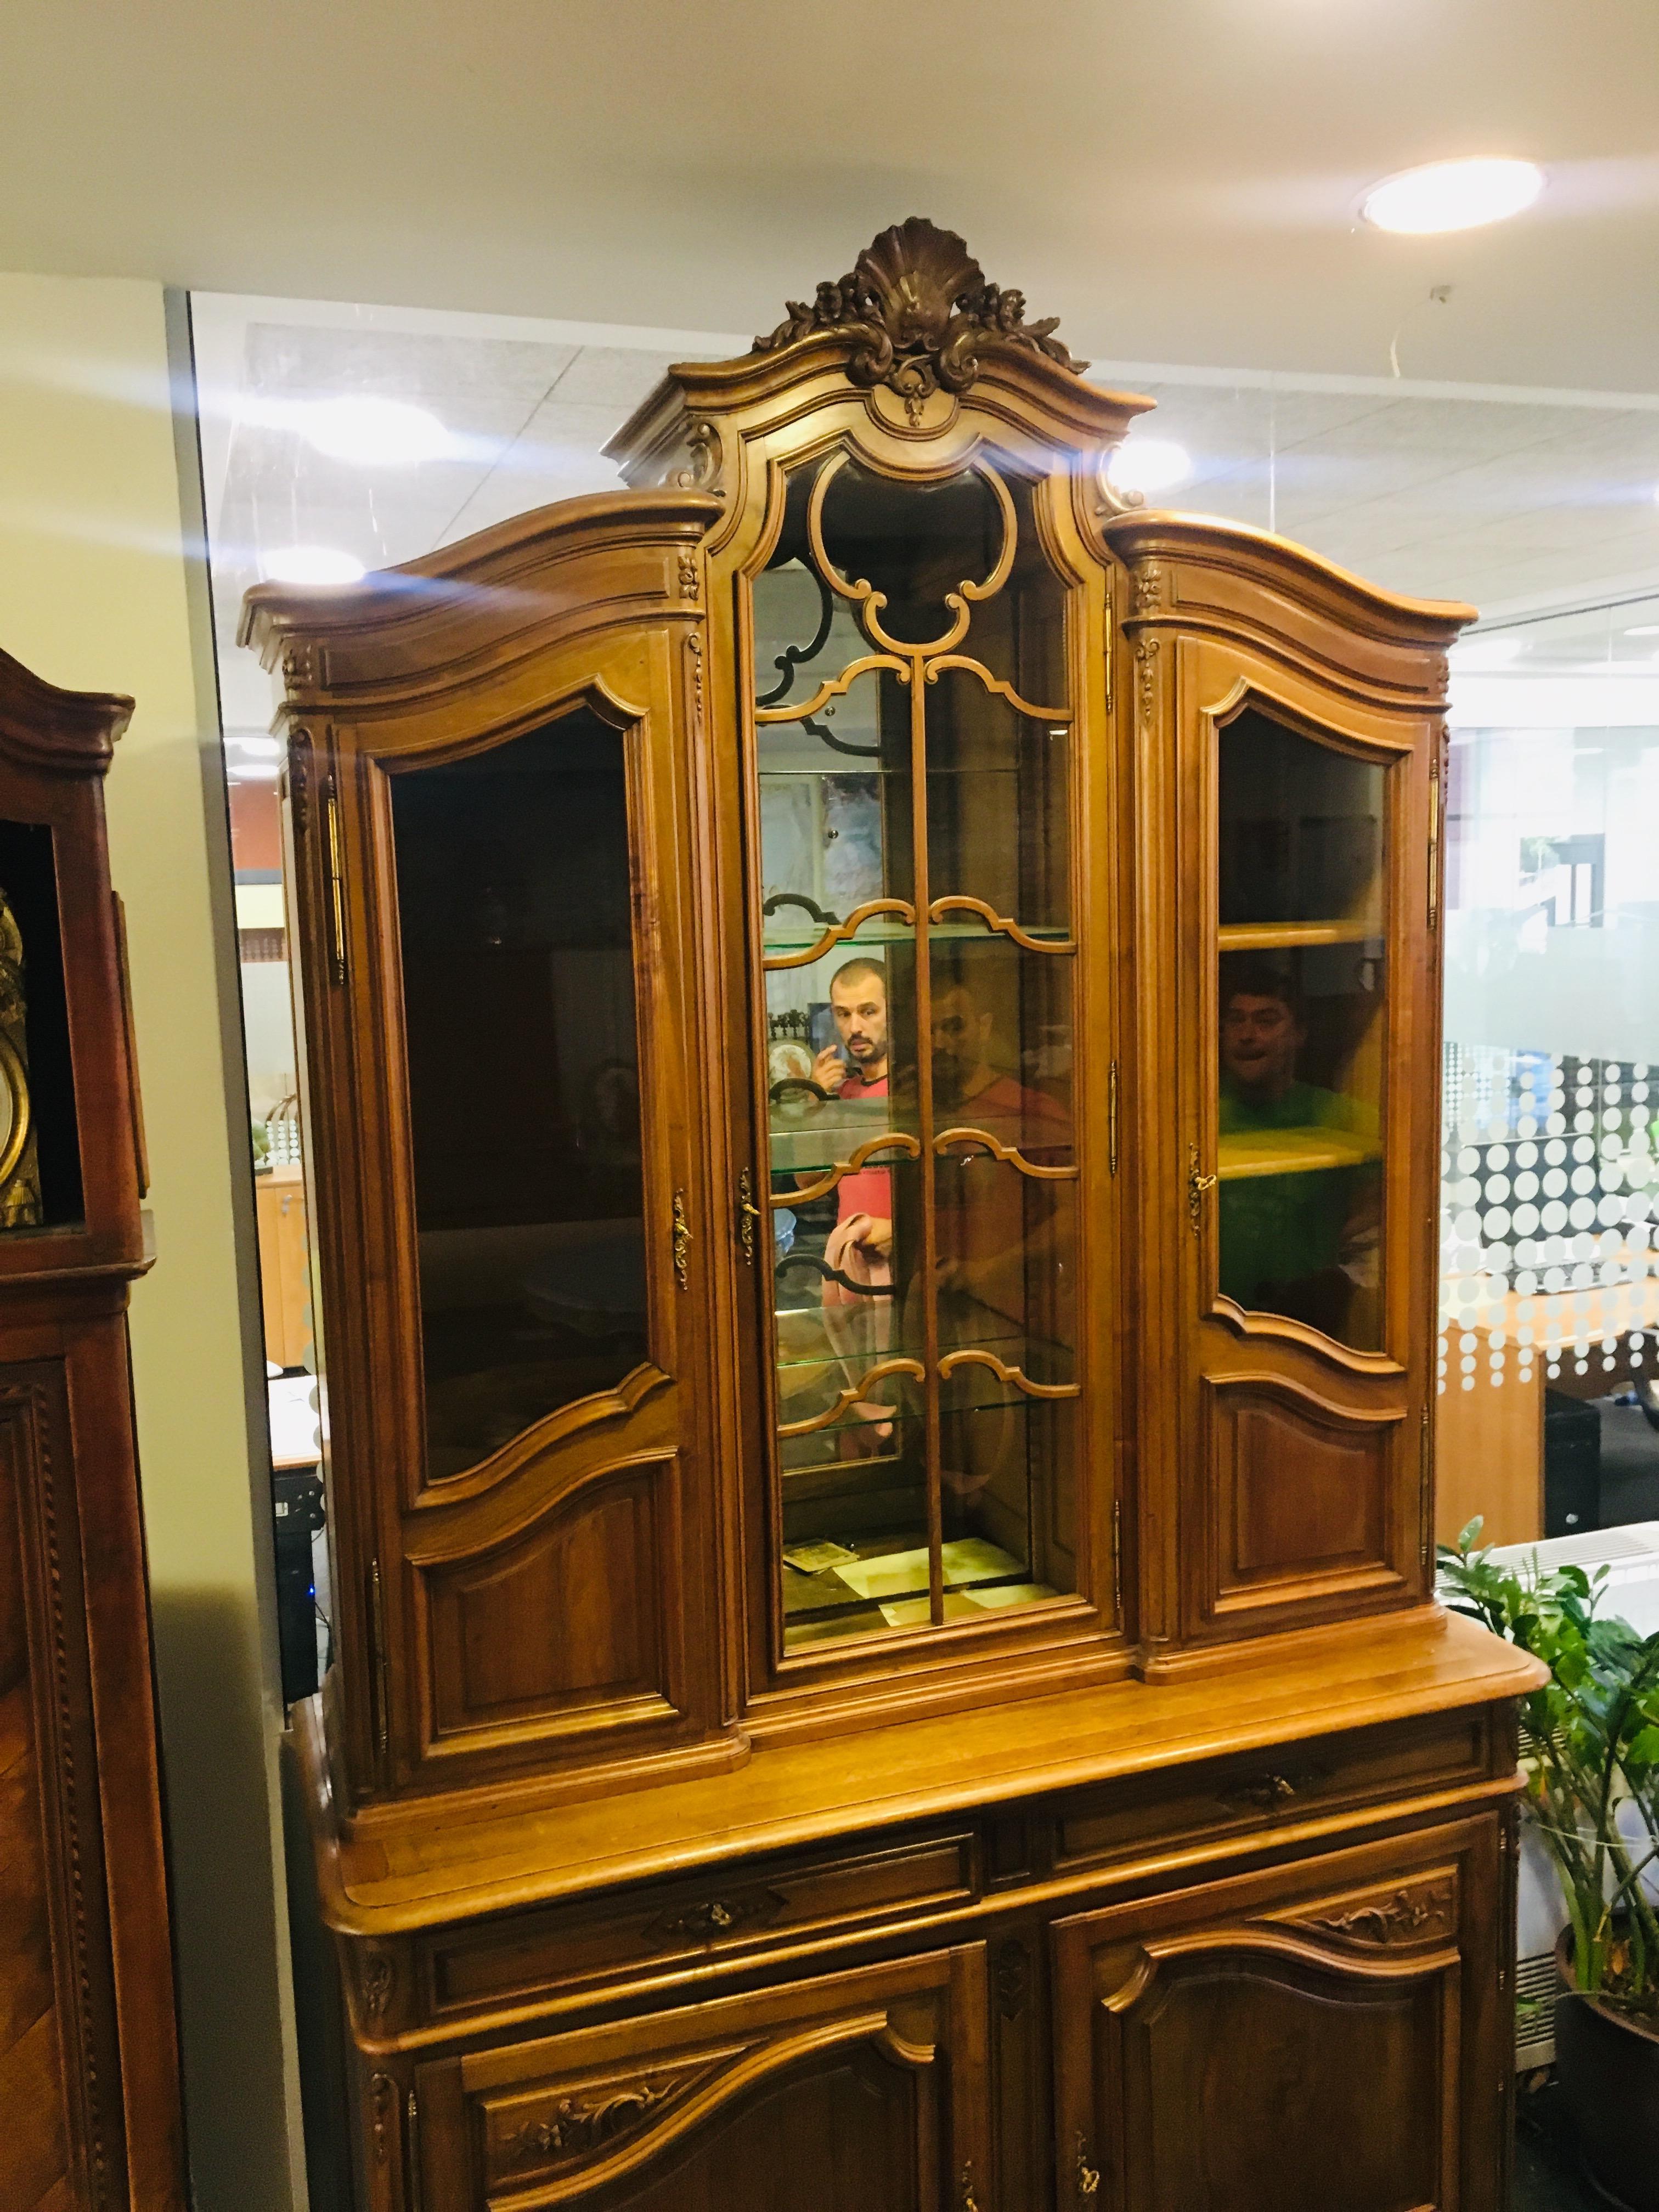 A late 19th century Louis XV style French vitrine a deux corps made of solid walnut with raised panels and beautiful carved details. Crown has curved corners with floral carving at the center. Buffet provides perfect storage place, with top part